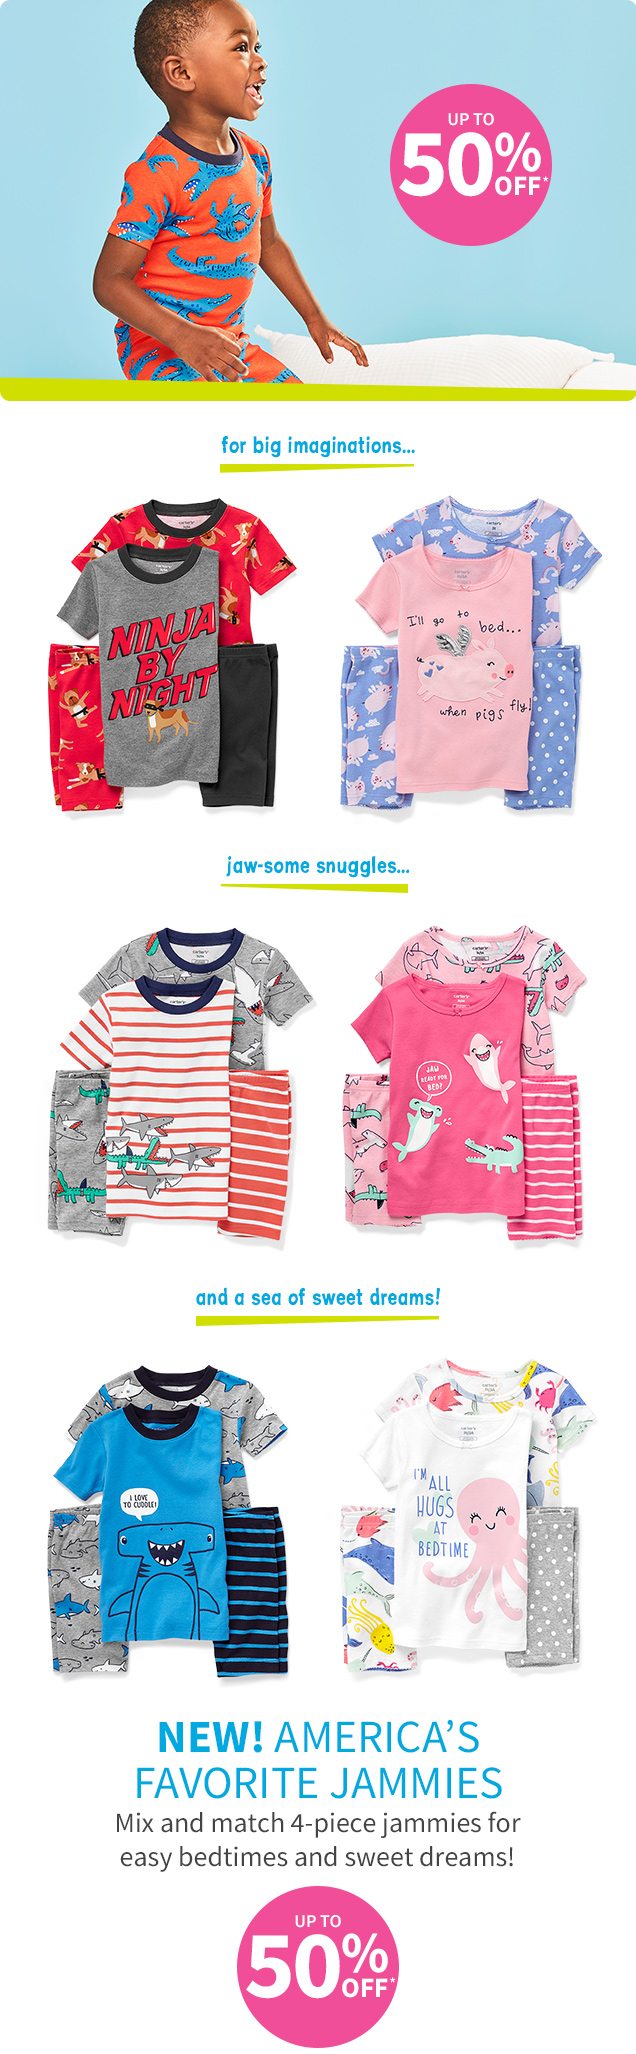 UP TO 50% OFF* | for big imaginations...|jaw-some snuggles...| and a sea of sweet dreams! | NEW! AMERICA'S FAVORITE JAMMIES | Mix and match 4-piece jammies for easy bedtimes and sweet dreams! | UP TO 50% OFF*